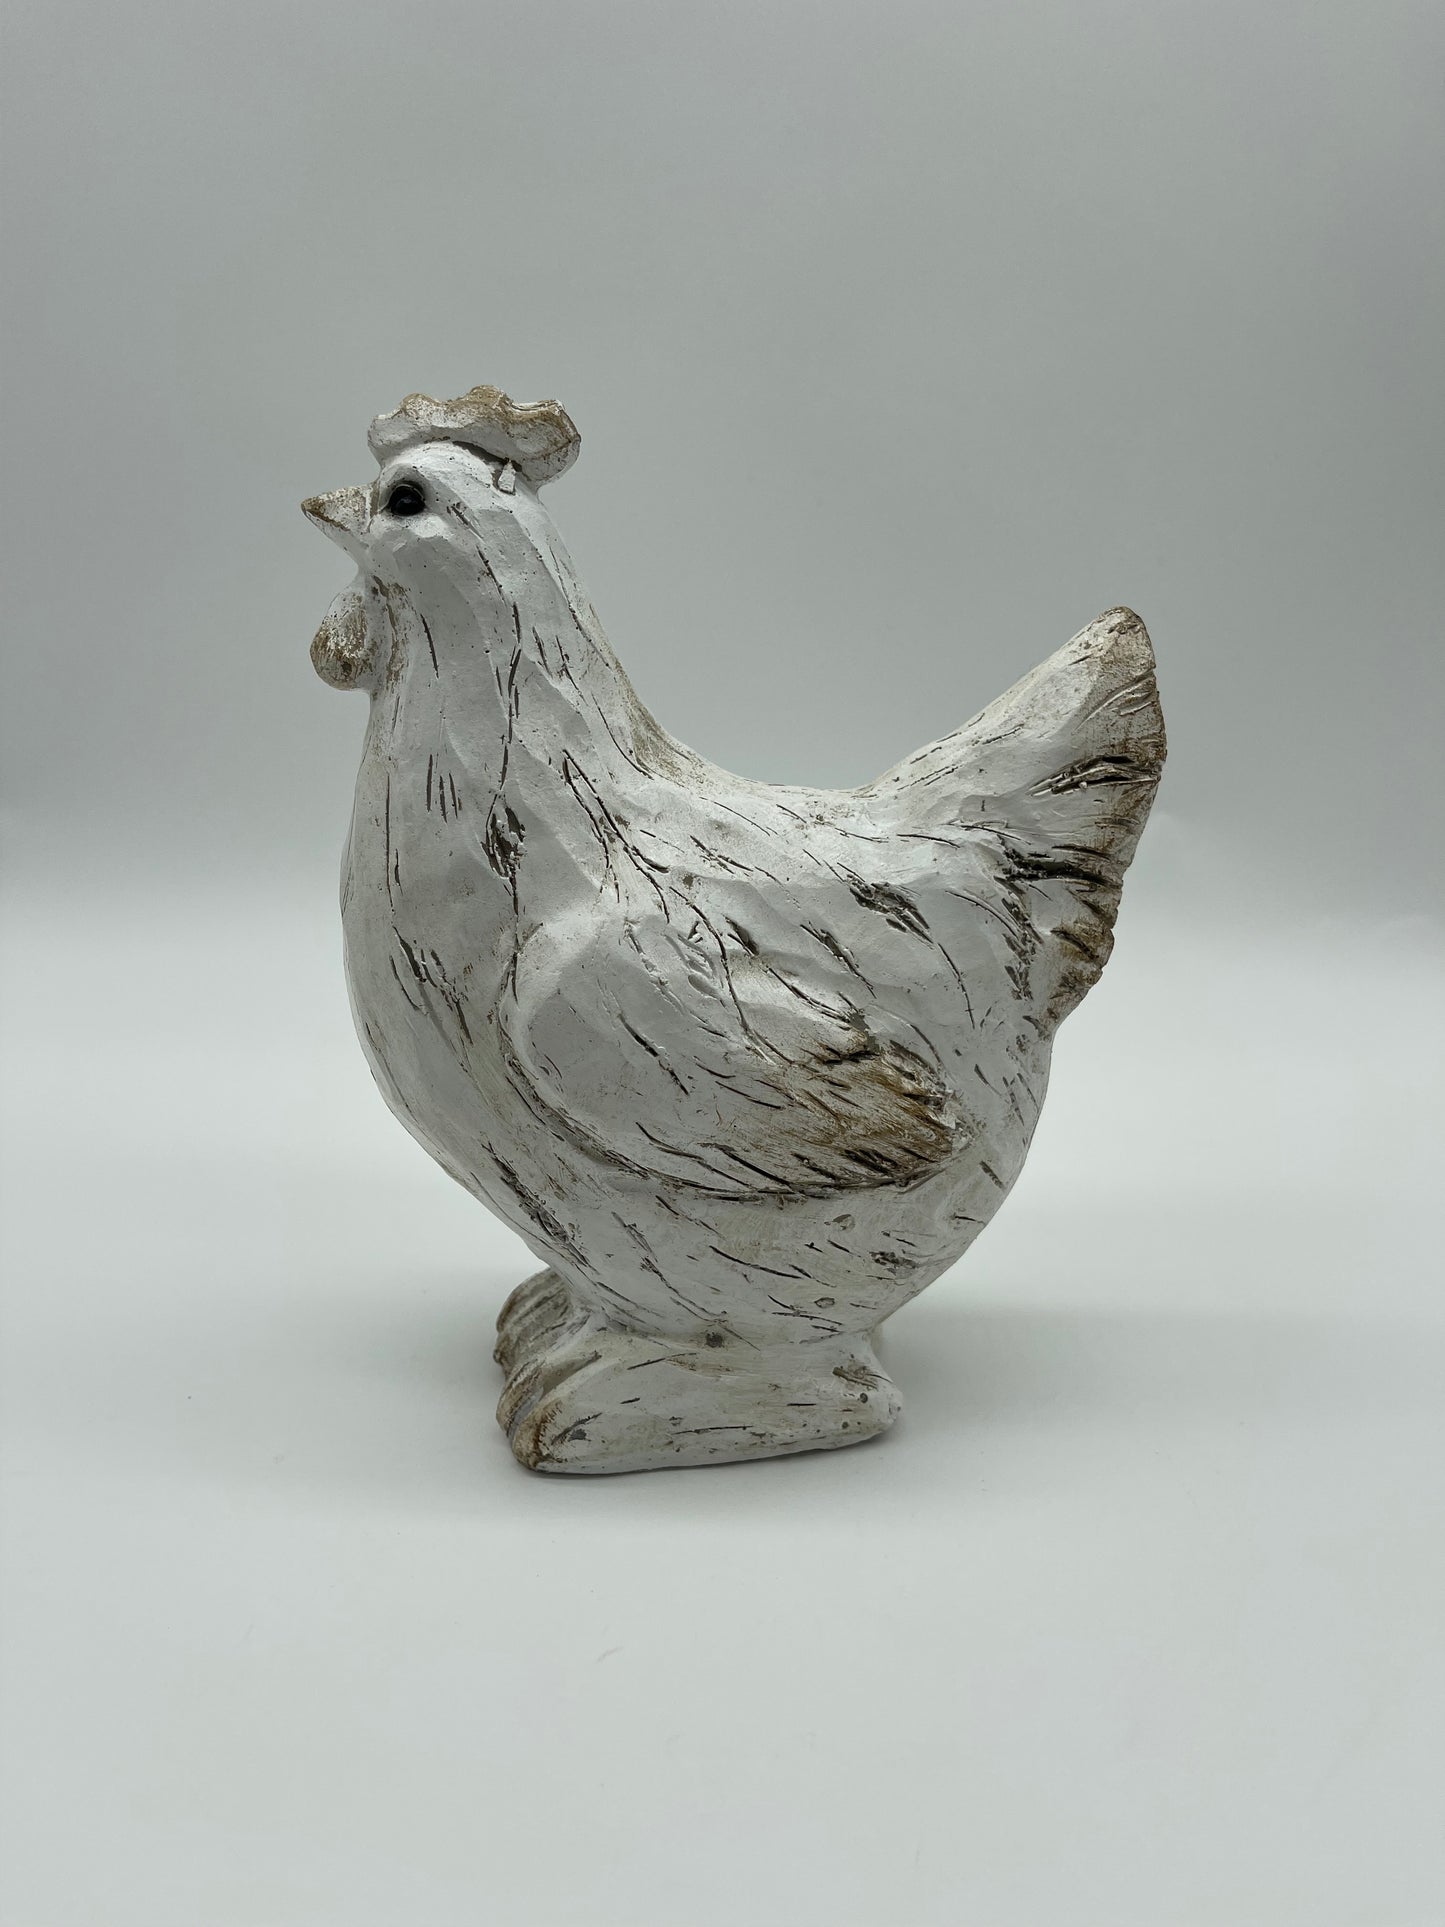 The  Henrietta Hen  And Rocky  Rooster  Family Collection